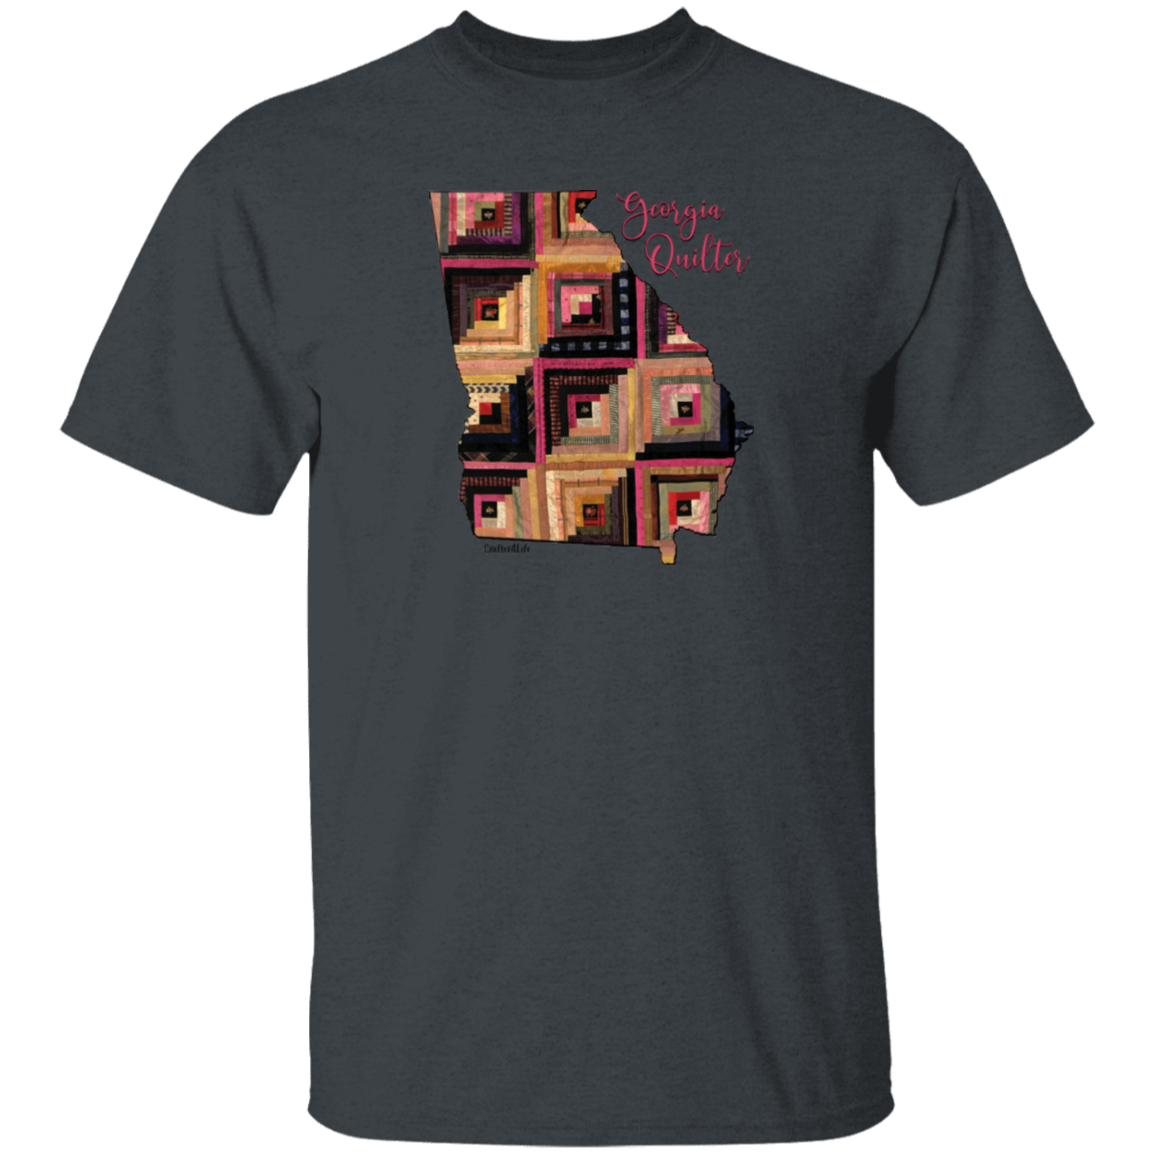 Georgia Quilter T-Shirt, Gift for Quilting Friends and Family